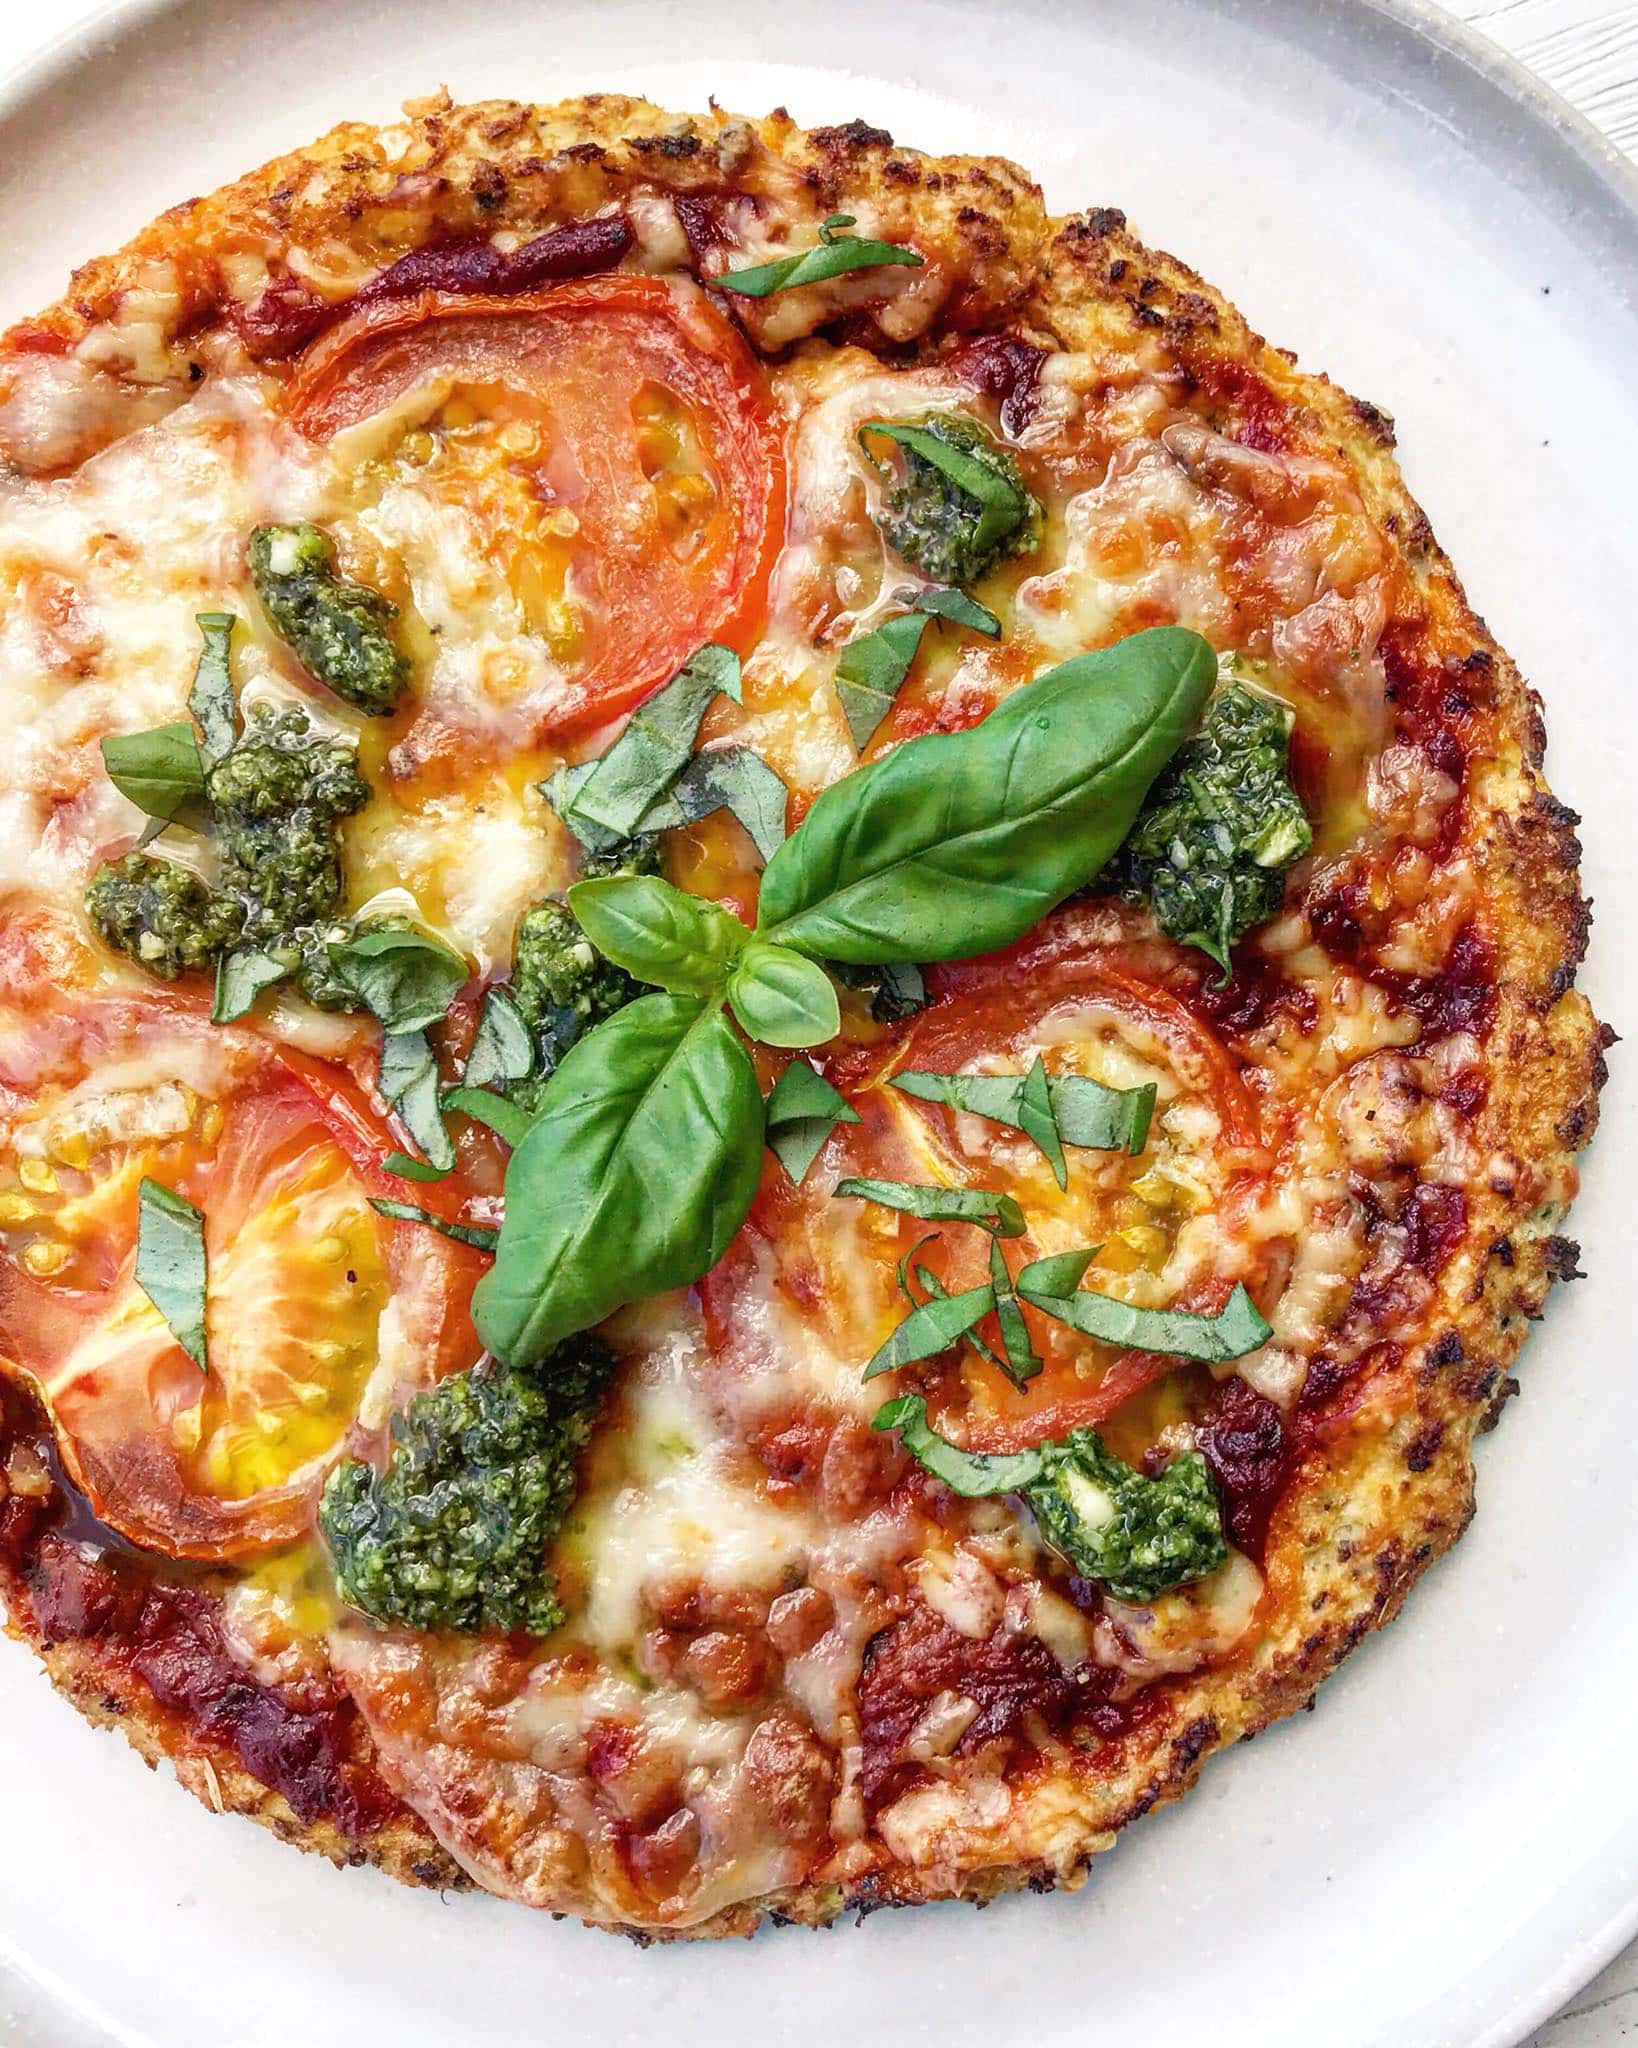 Cauliflower pizza base with tomato, cheese and pesto toppings.